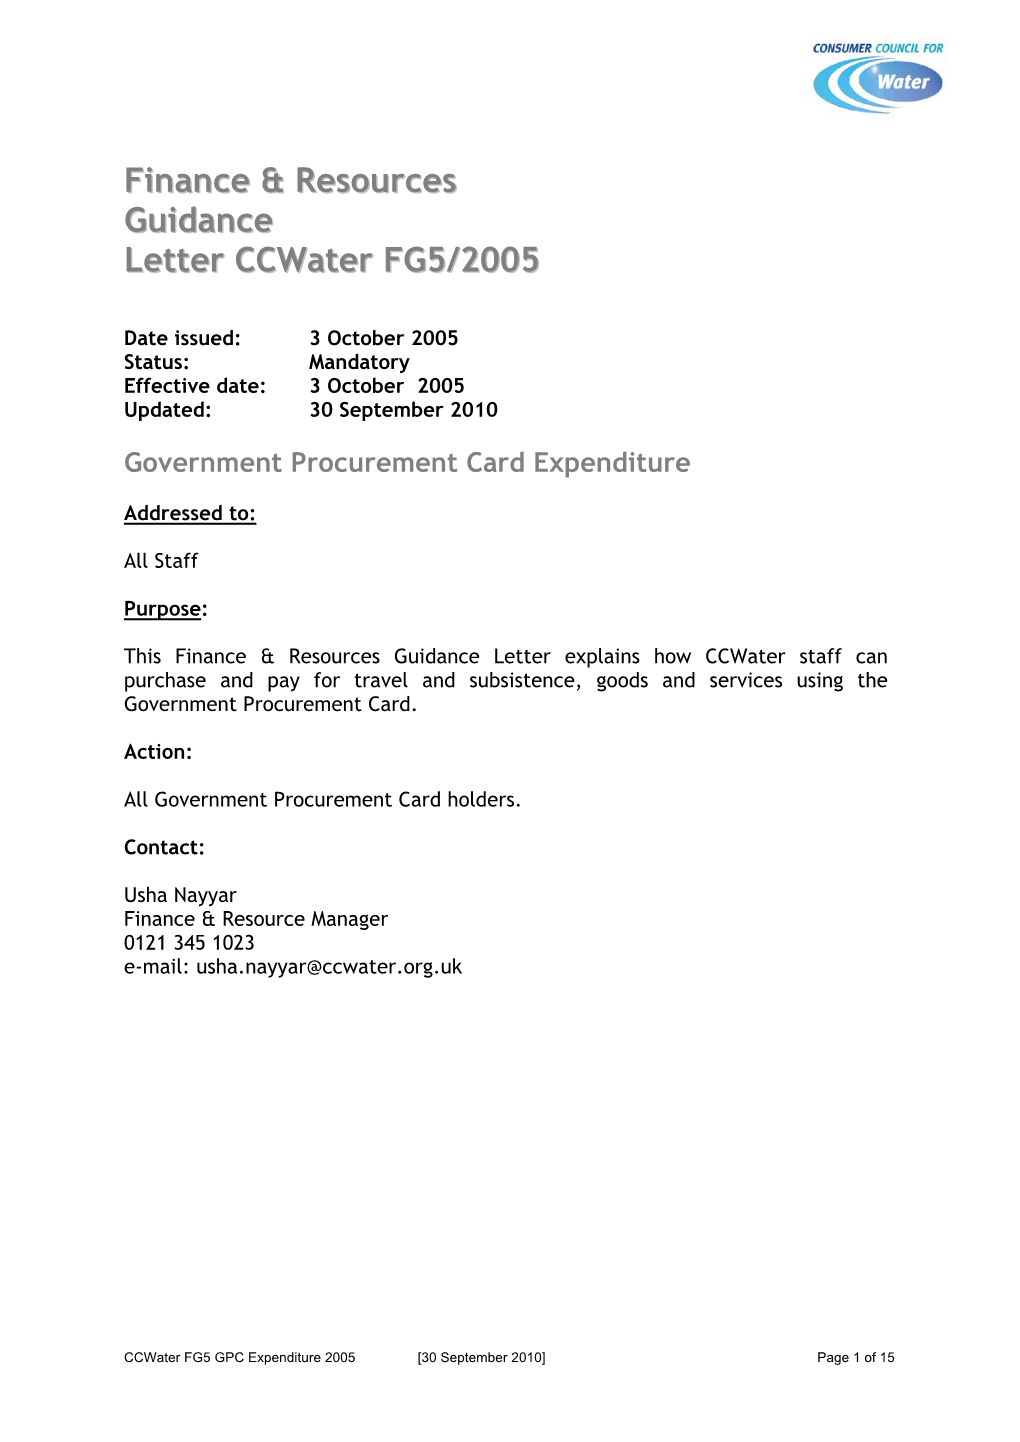 Finance & Resources Guidance Letter Ccwater FG5/2005